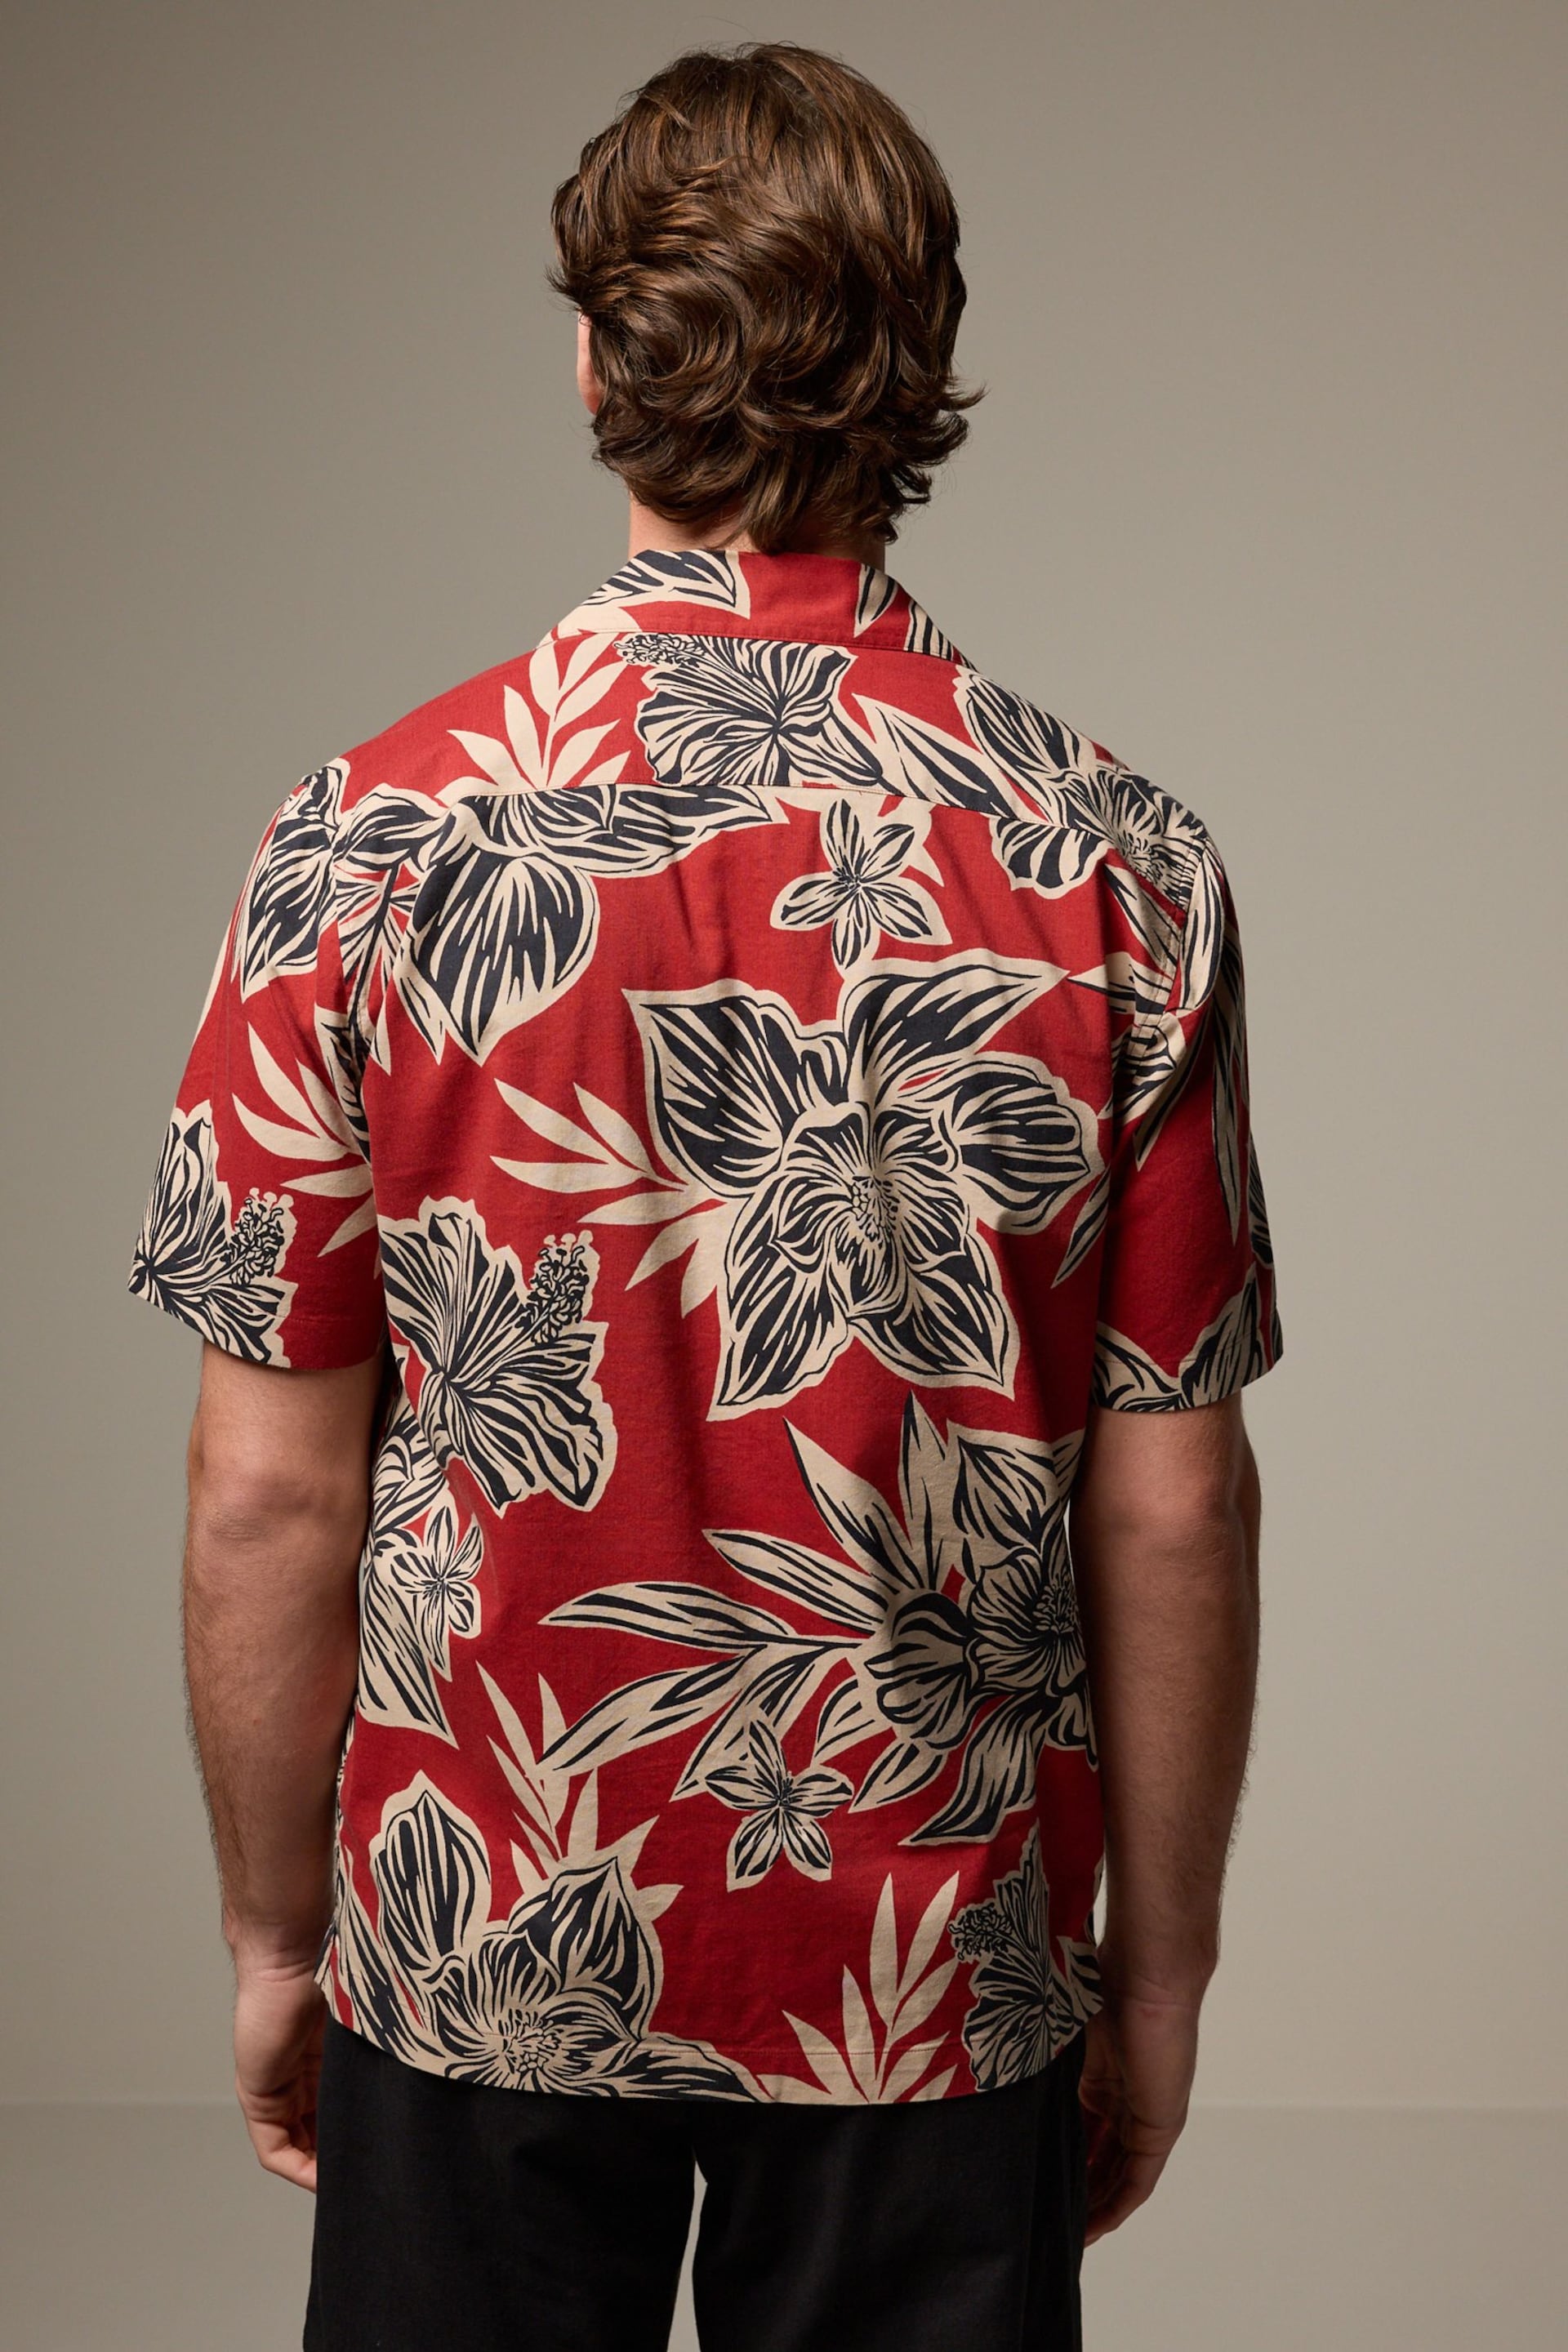 Red Short Sleeve Floral Print Shirt - Image 4 of 8